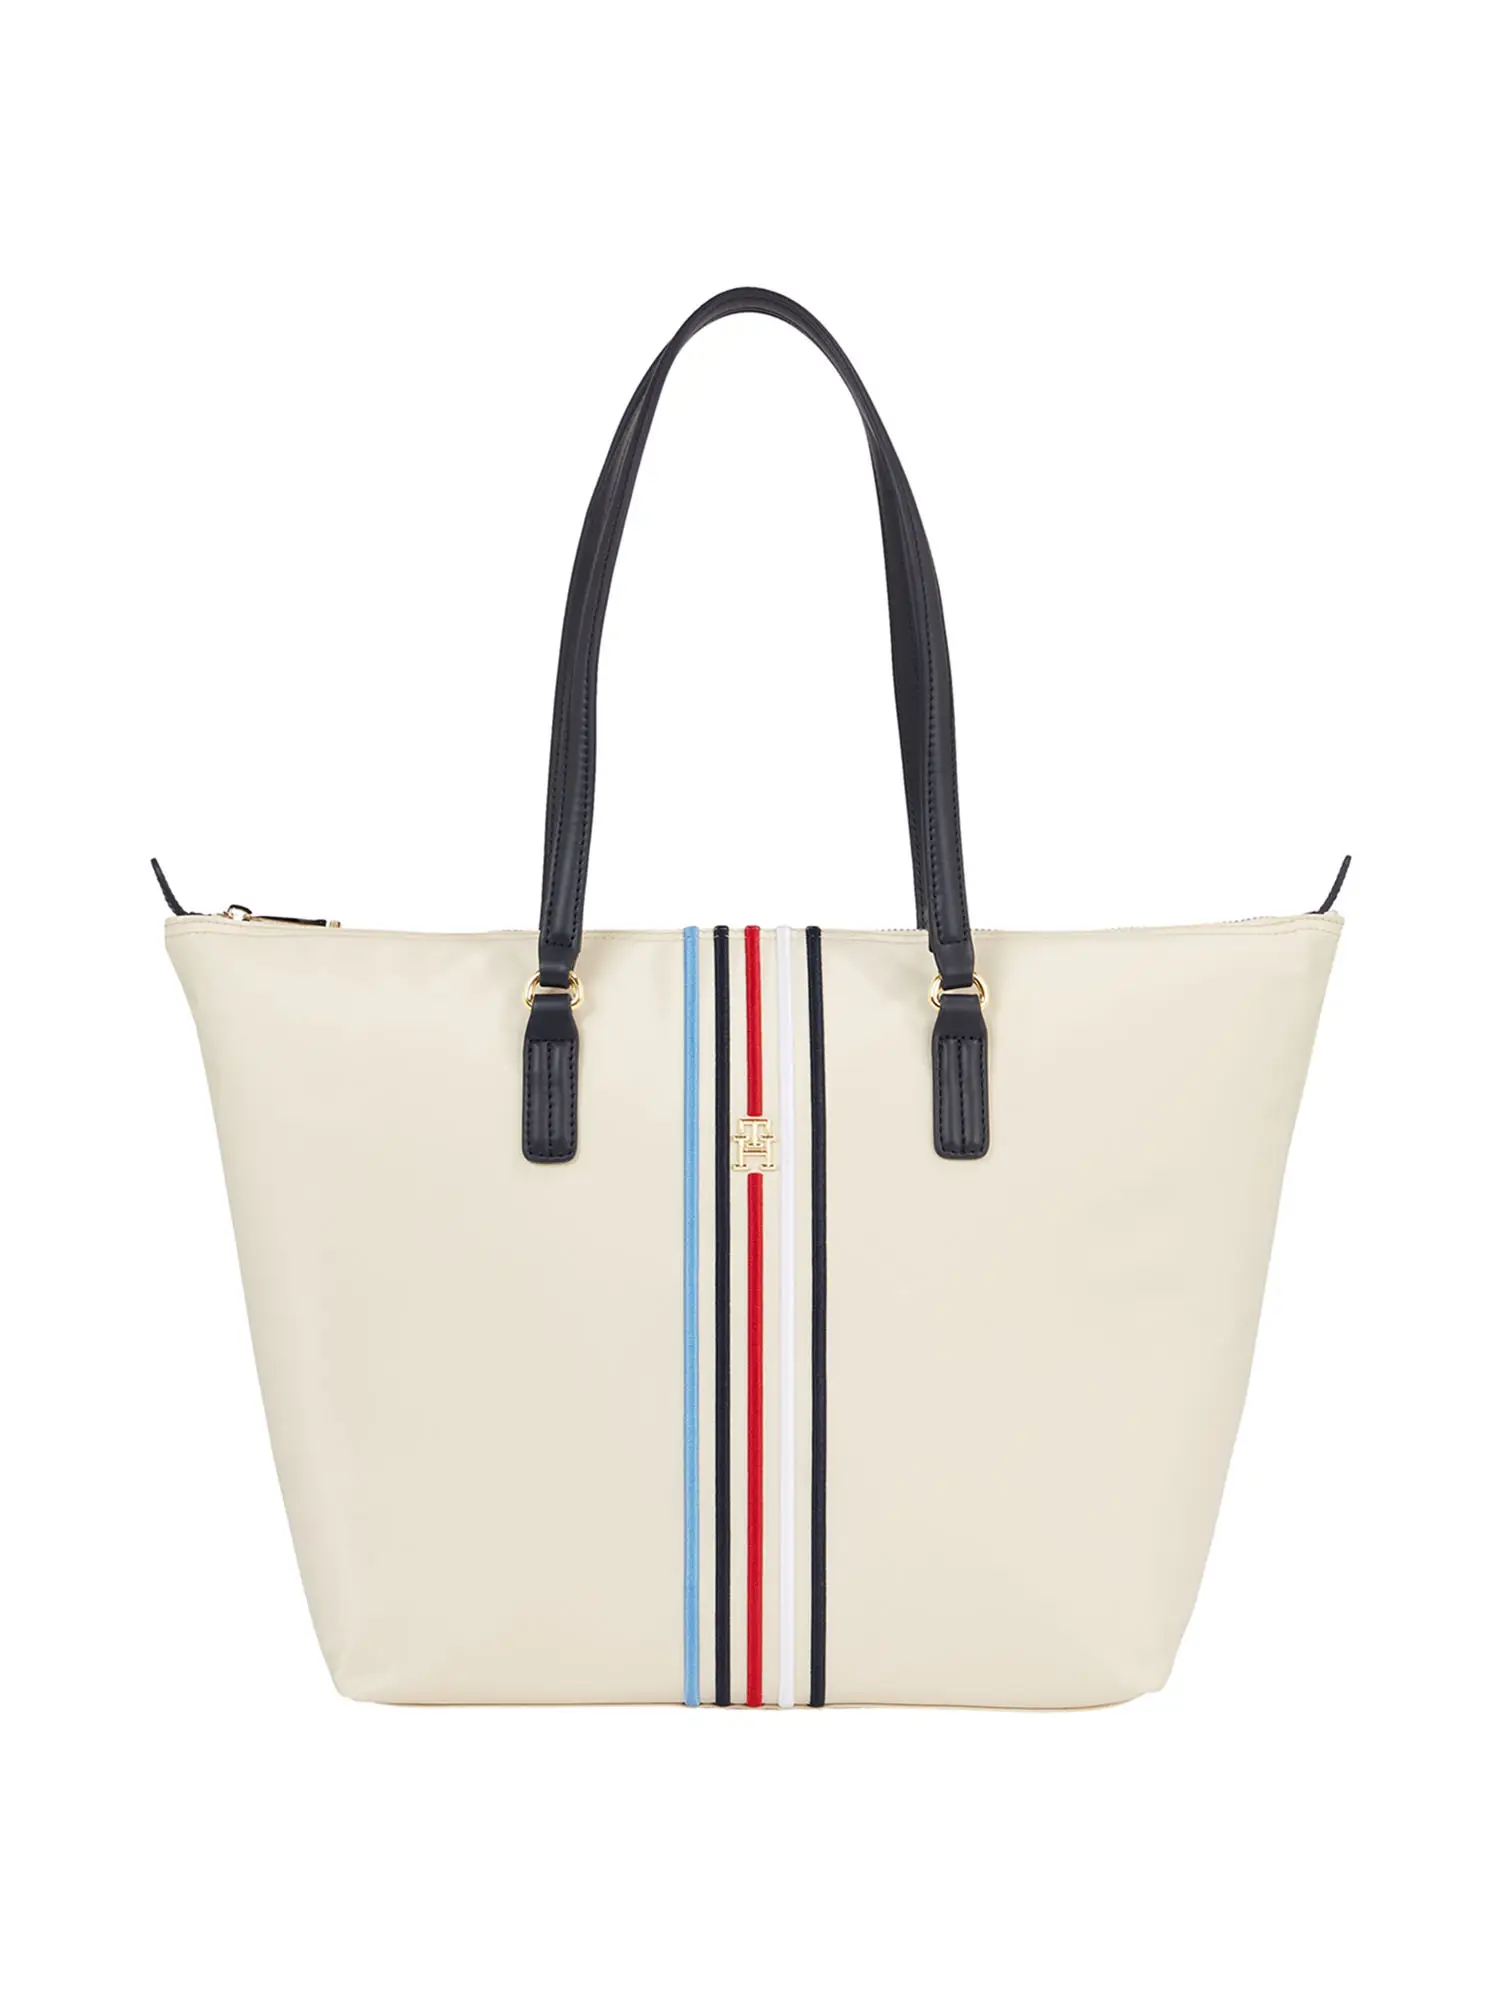 TOTE DONNA - TOMMY HILFIGER - AW0AW15981 - BIANCO, UNICA